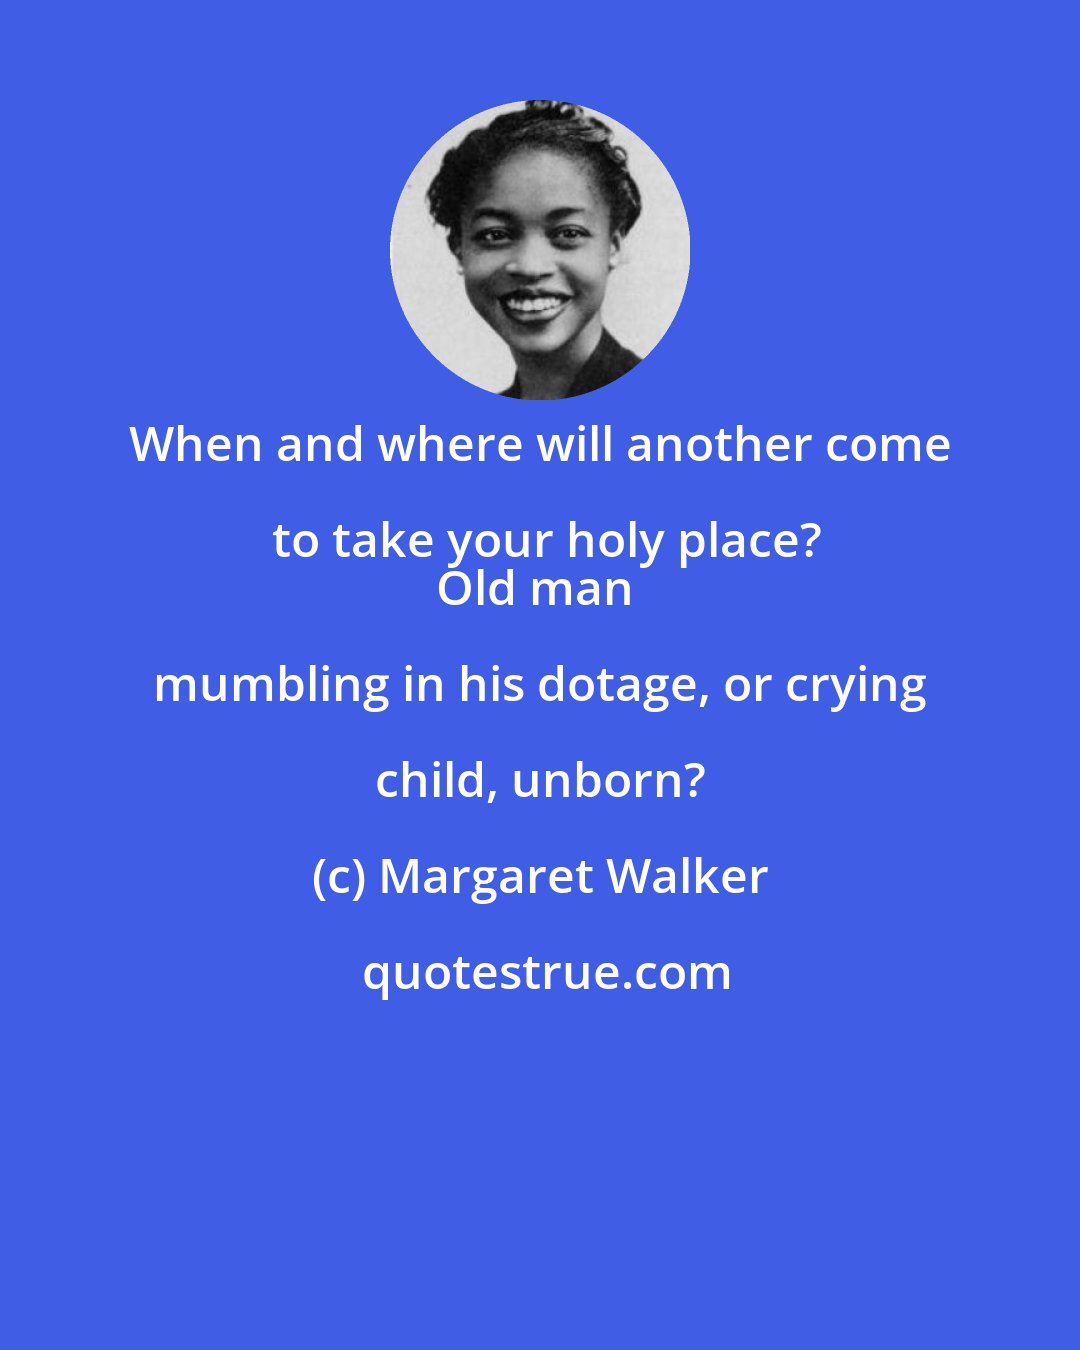 Margaret Walker: When and where will another come to take your holy place?
Old man mumbling in his dotage, or crying child, unborn?